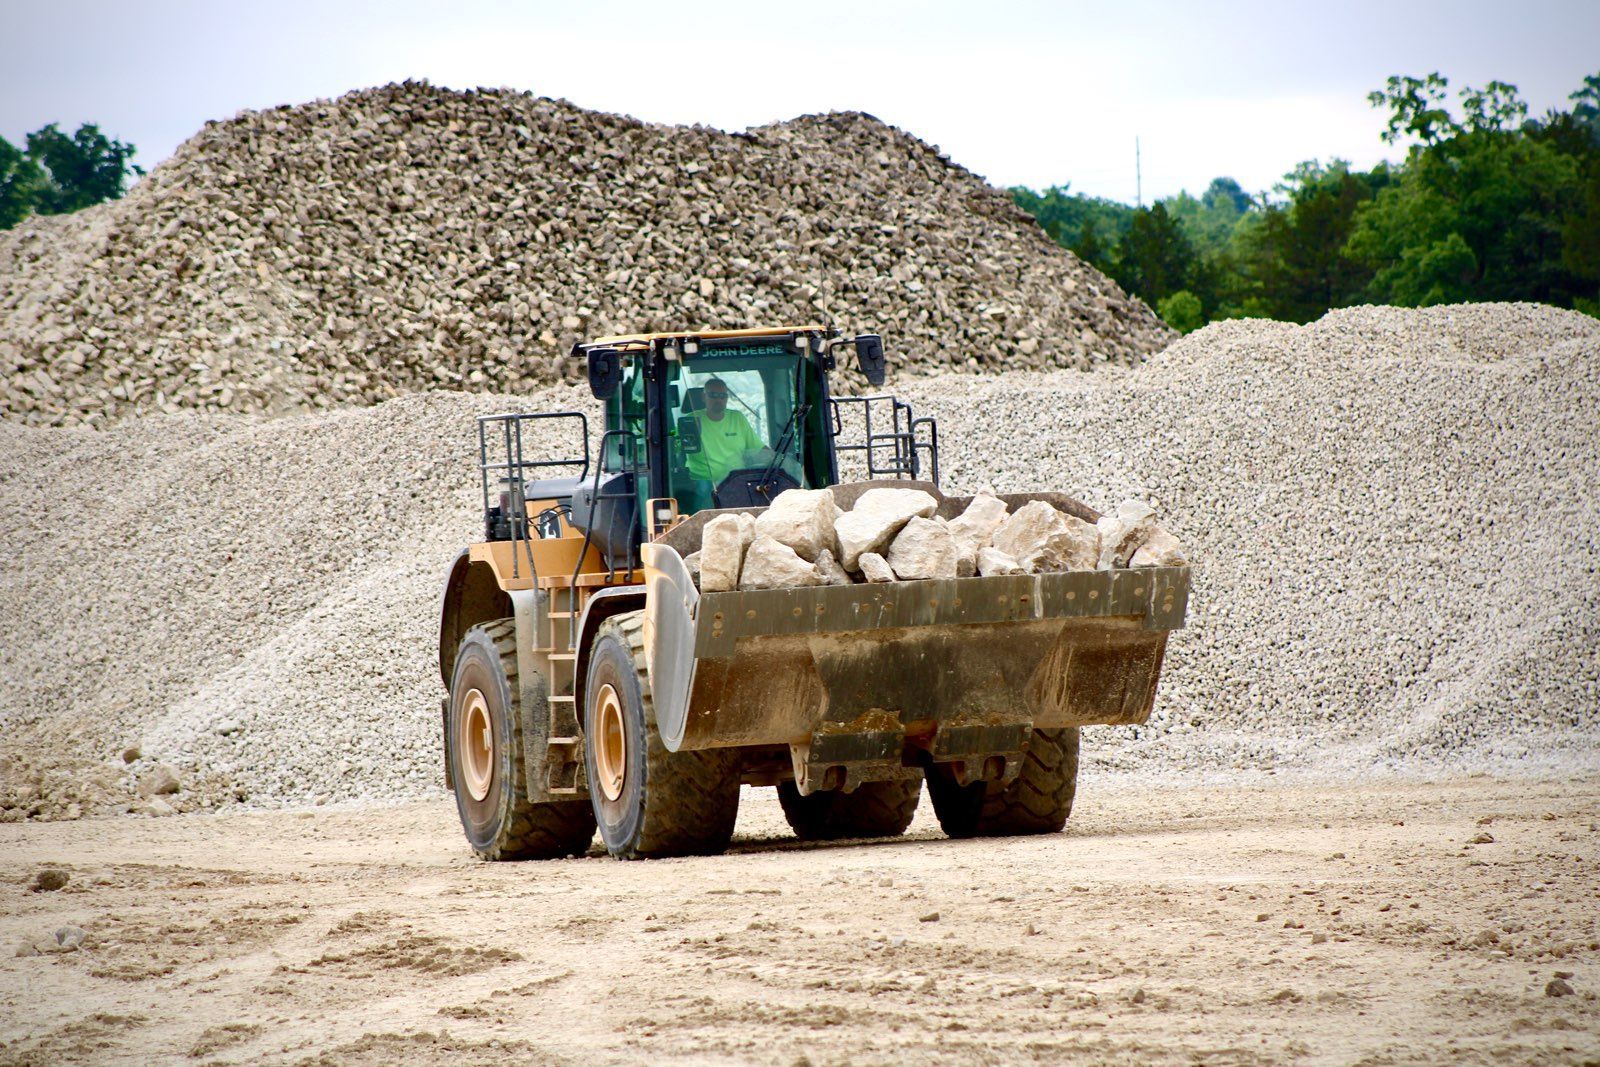 Get Sand, Gravel, Stone & More for Your Commercial or Residential Construction Needs in the Midwest